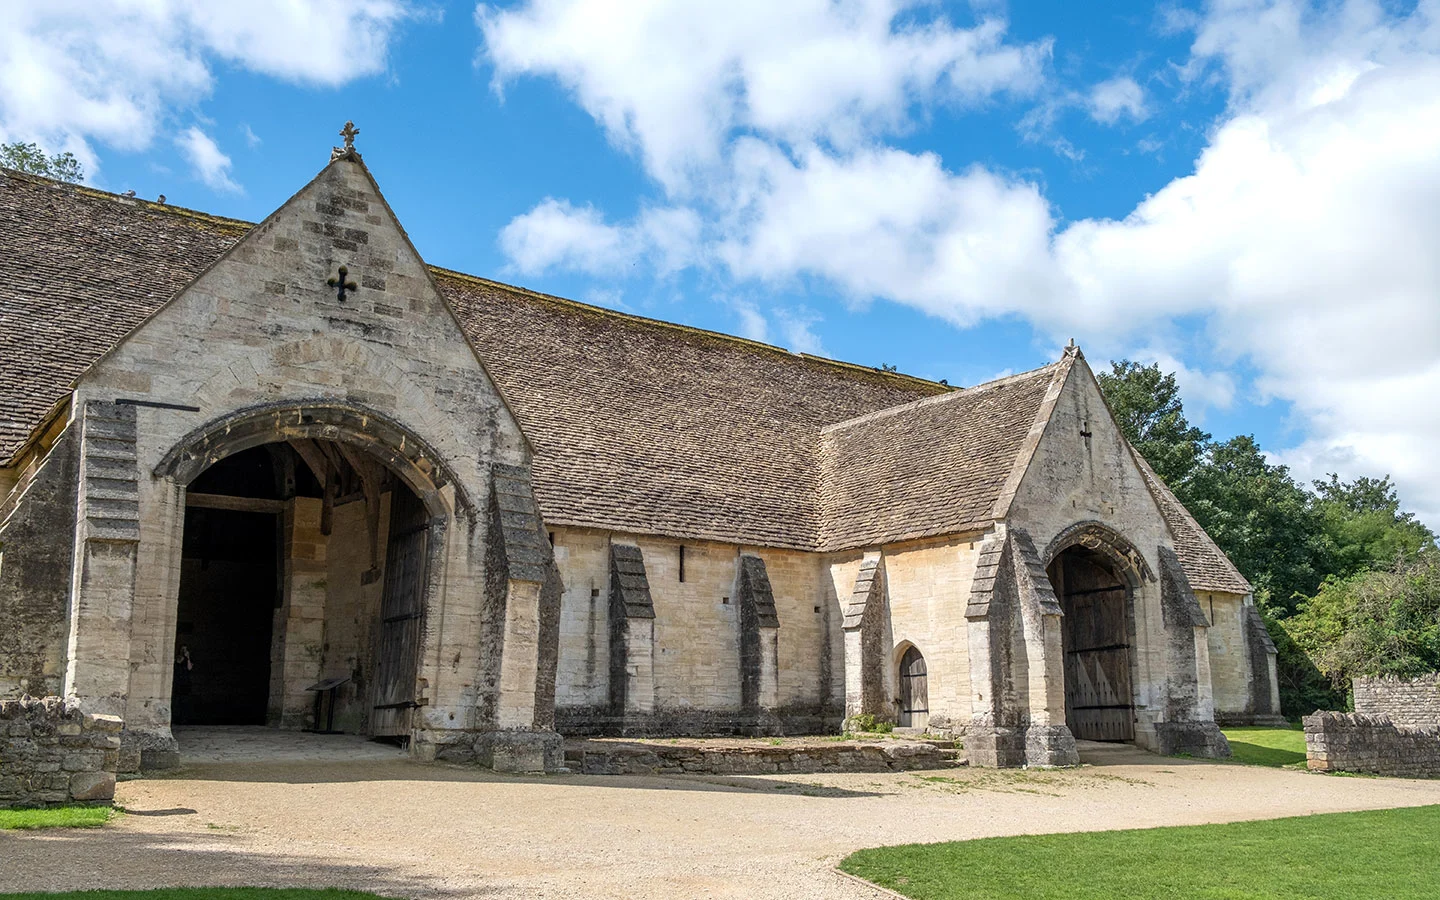 The Tithe Barn – one of the top things to do in Bradford on Avon